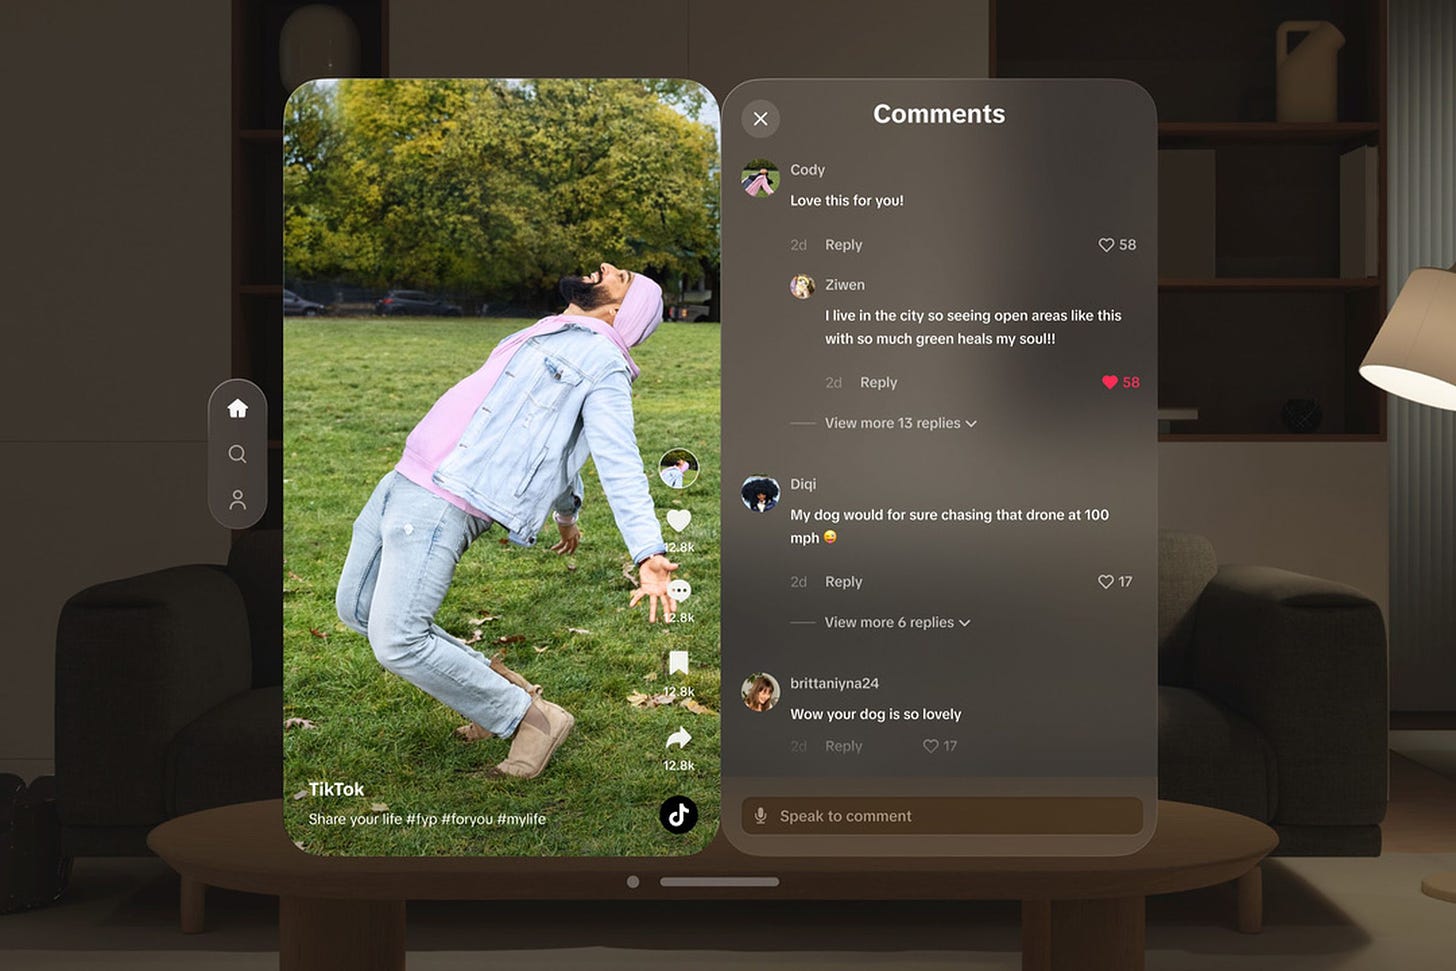 TikTok video on the vision pro with comments visible.